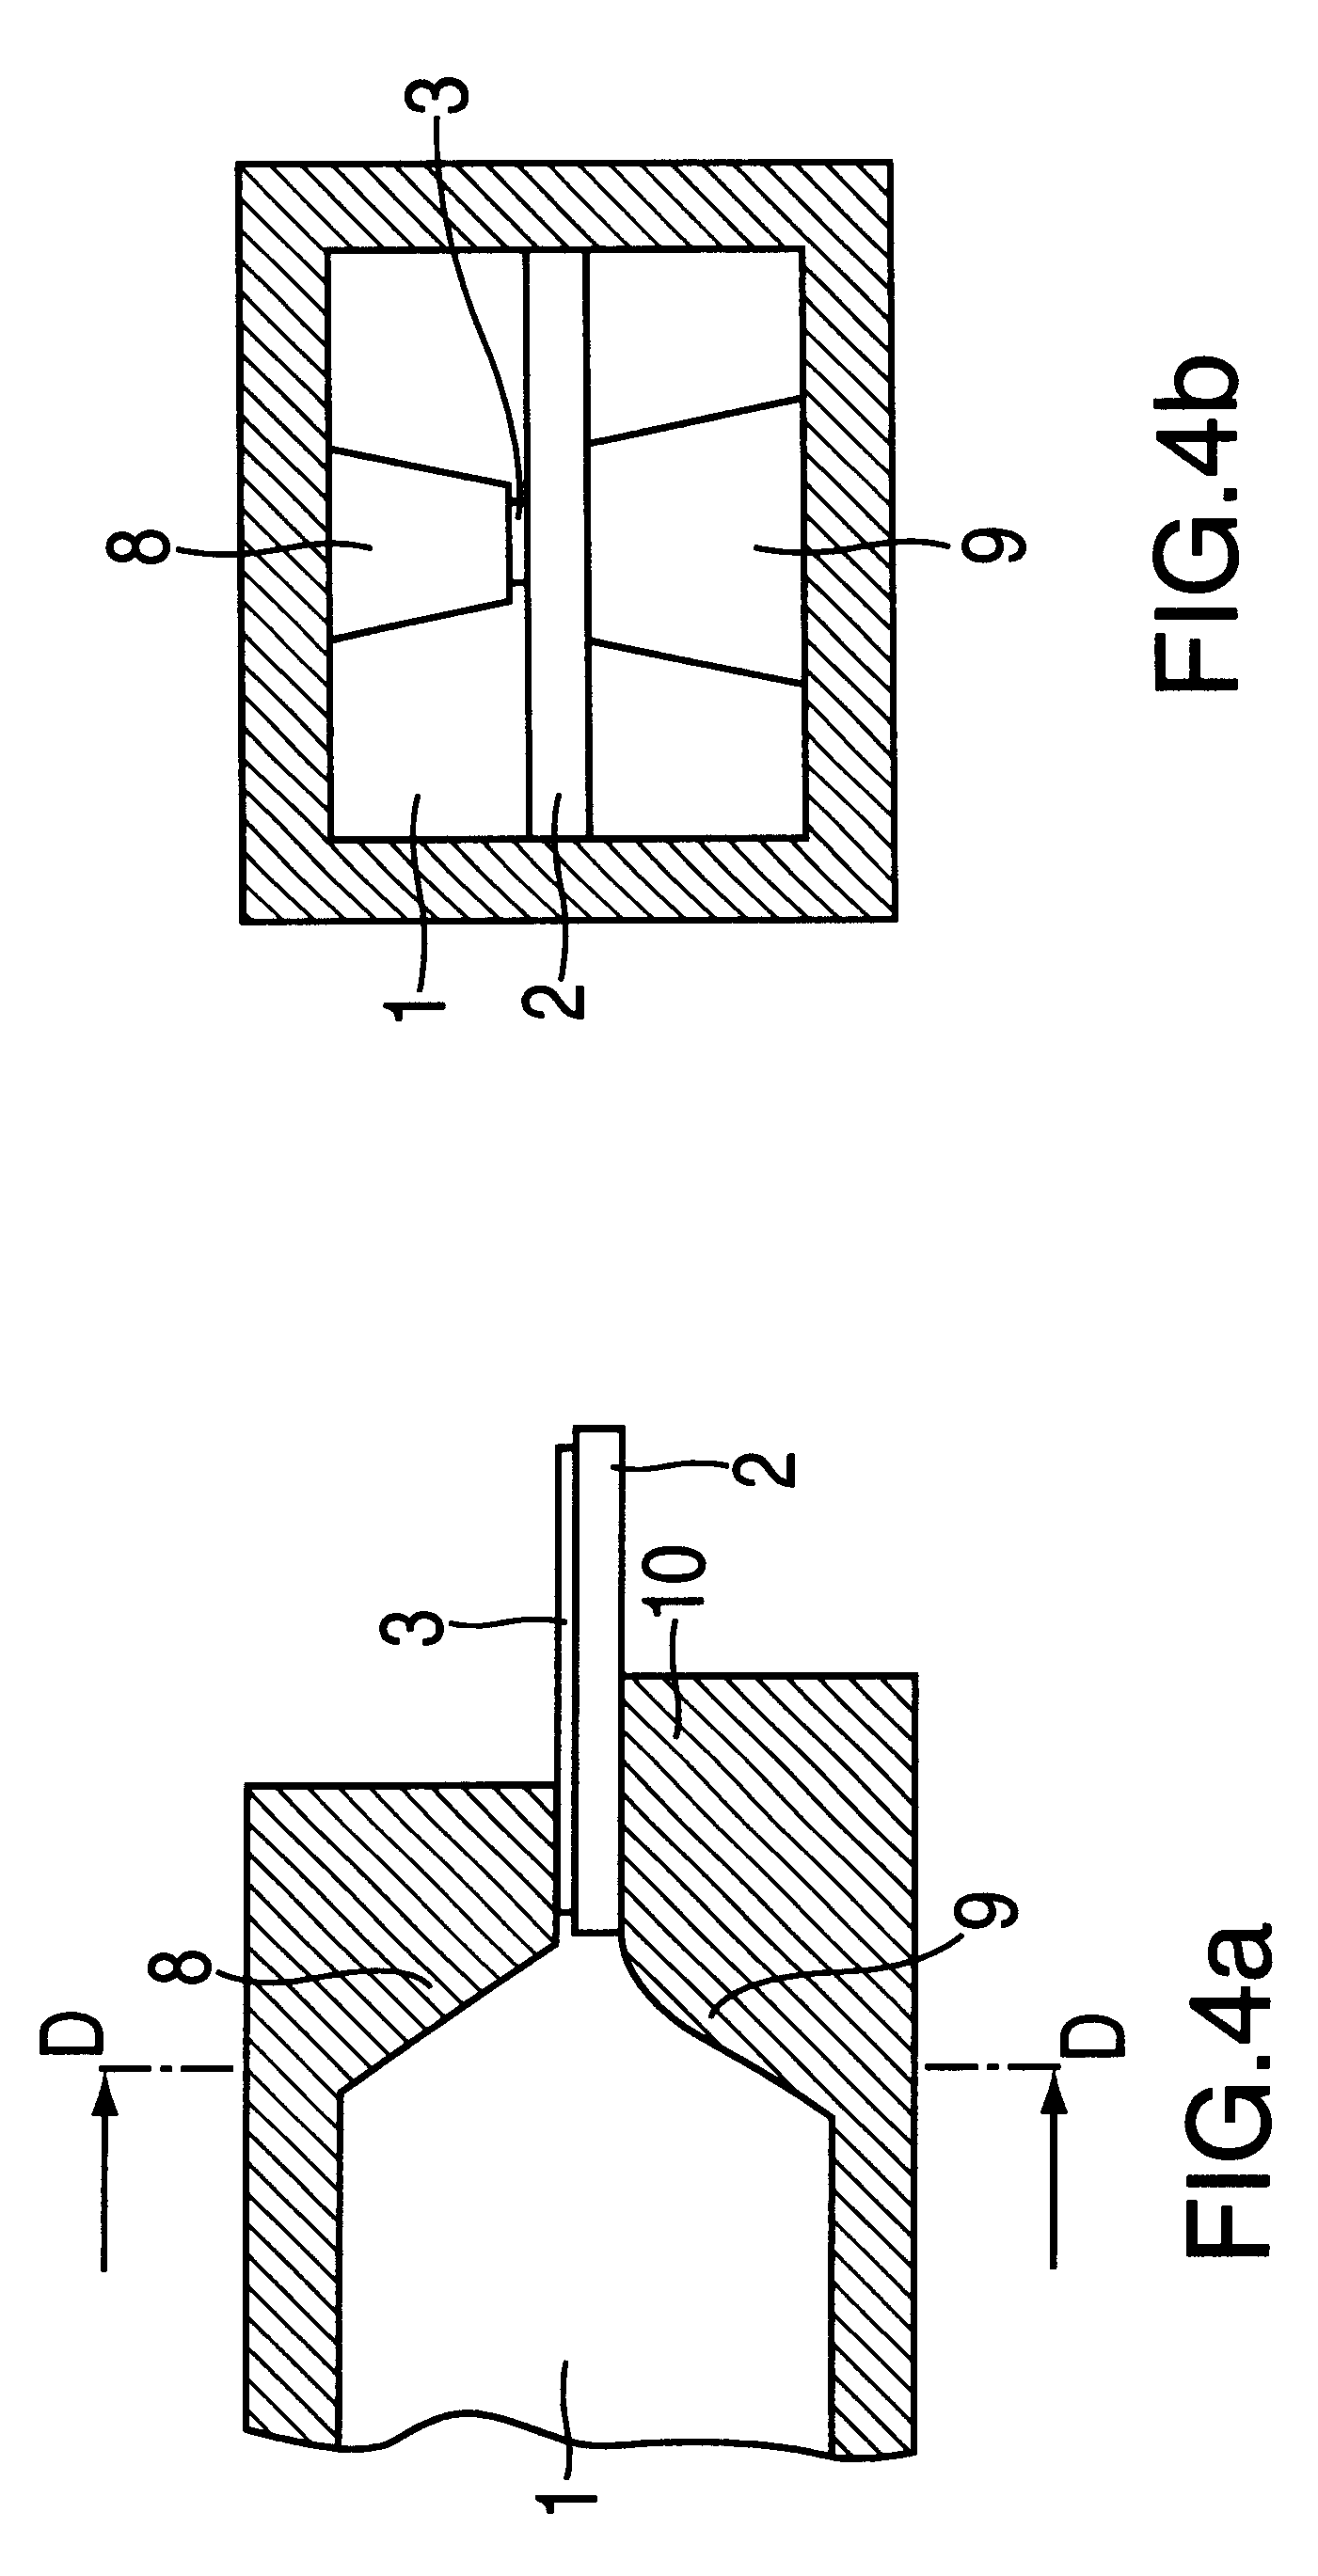 Transition from a waveguide to a strip transmission line